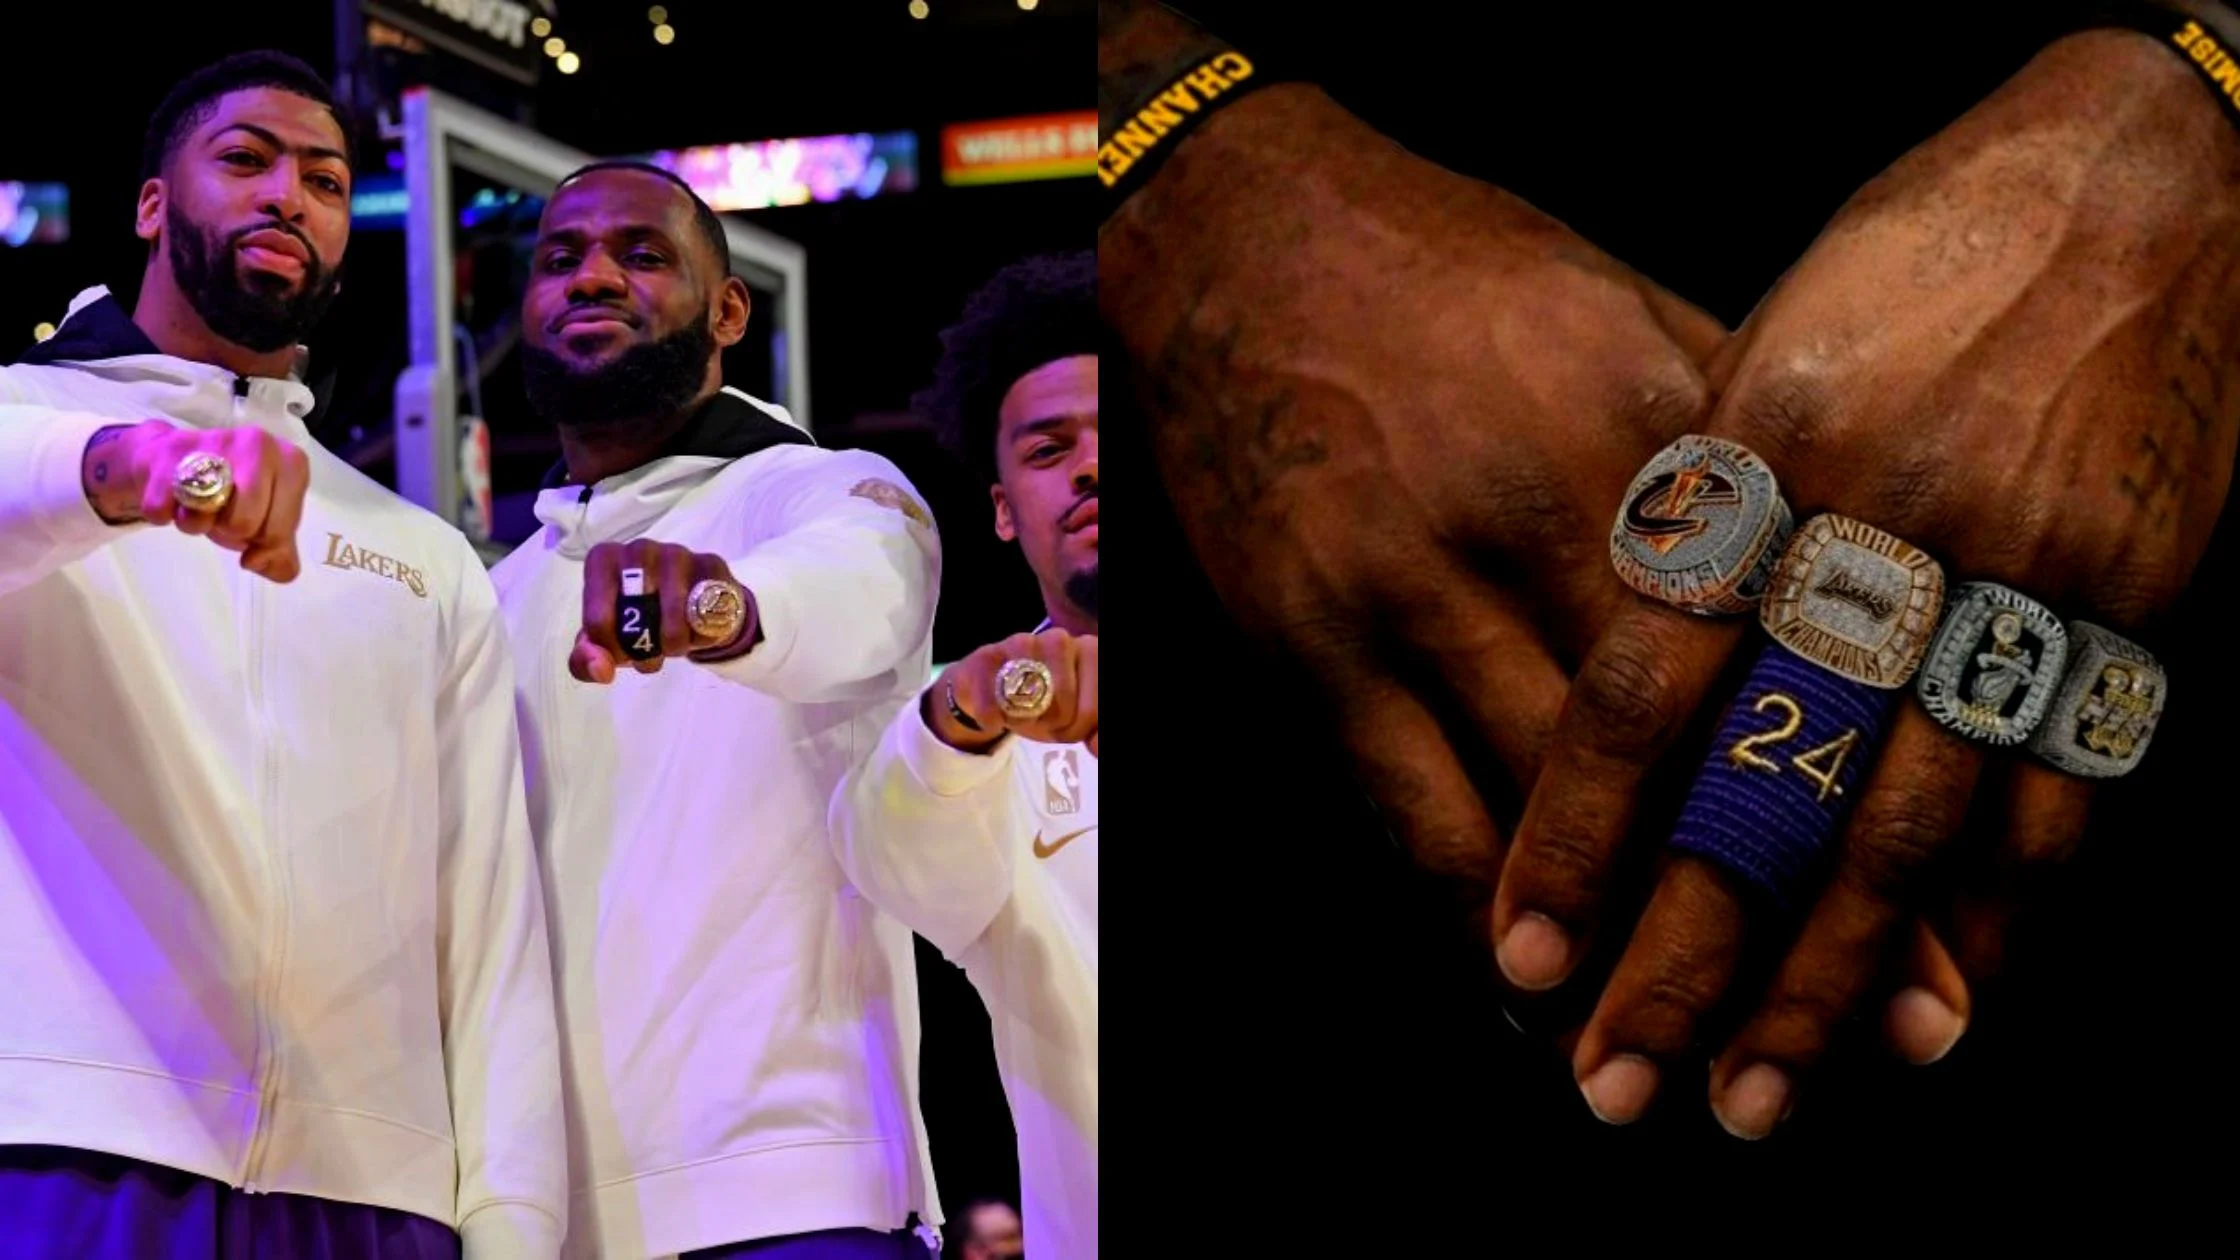 How Many NBA Championship Rings Does LeBron James Have